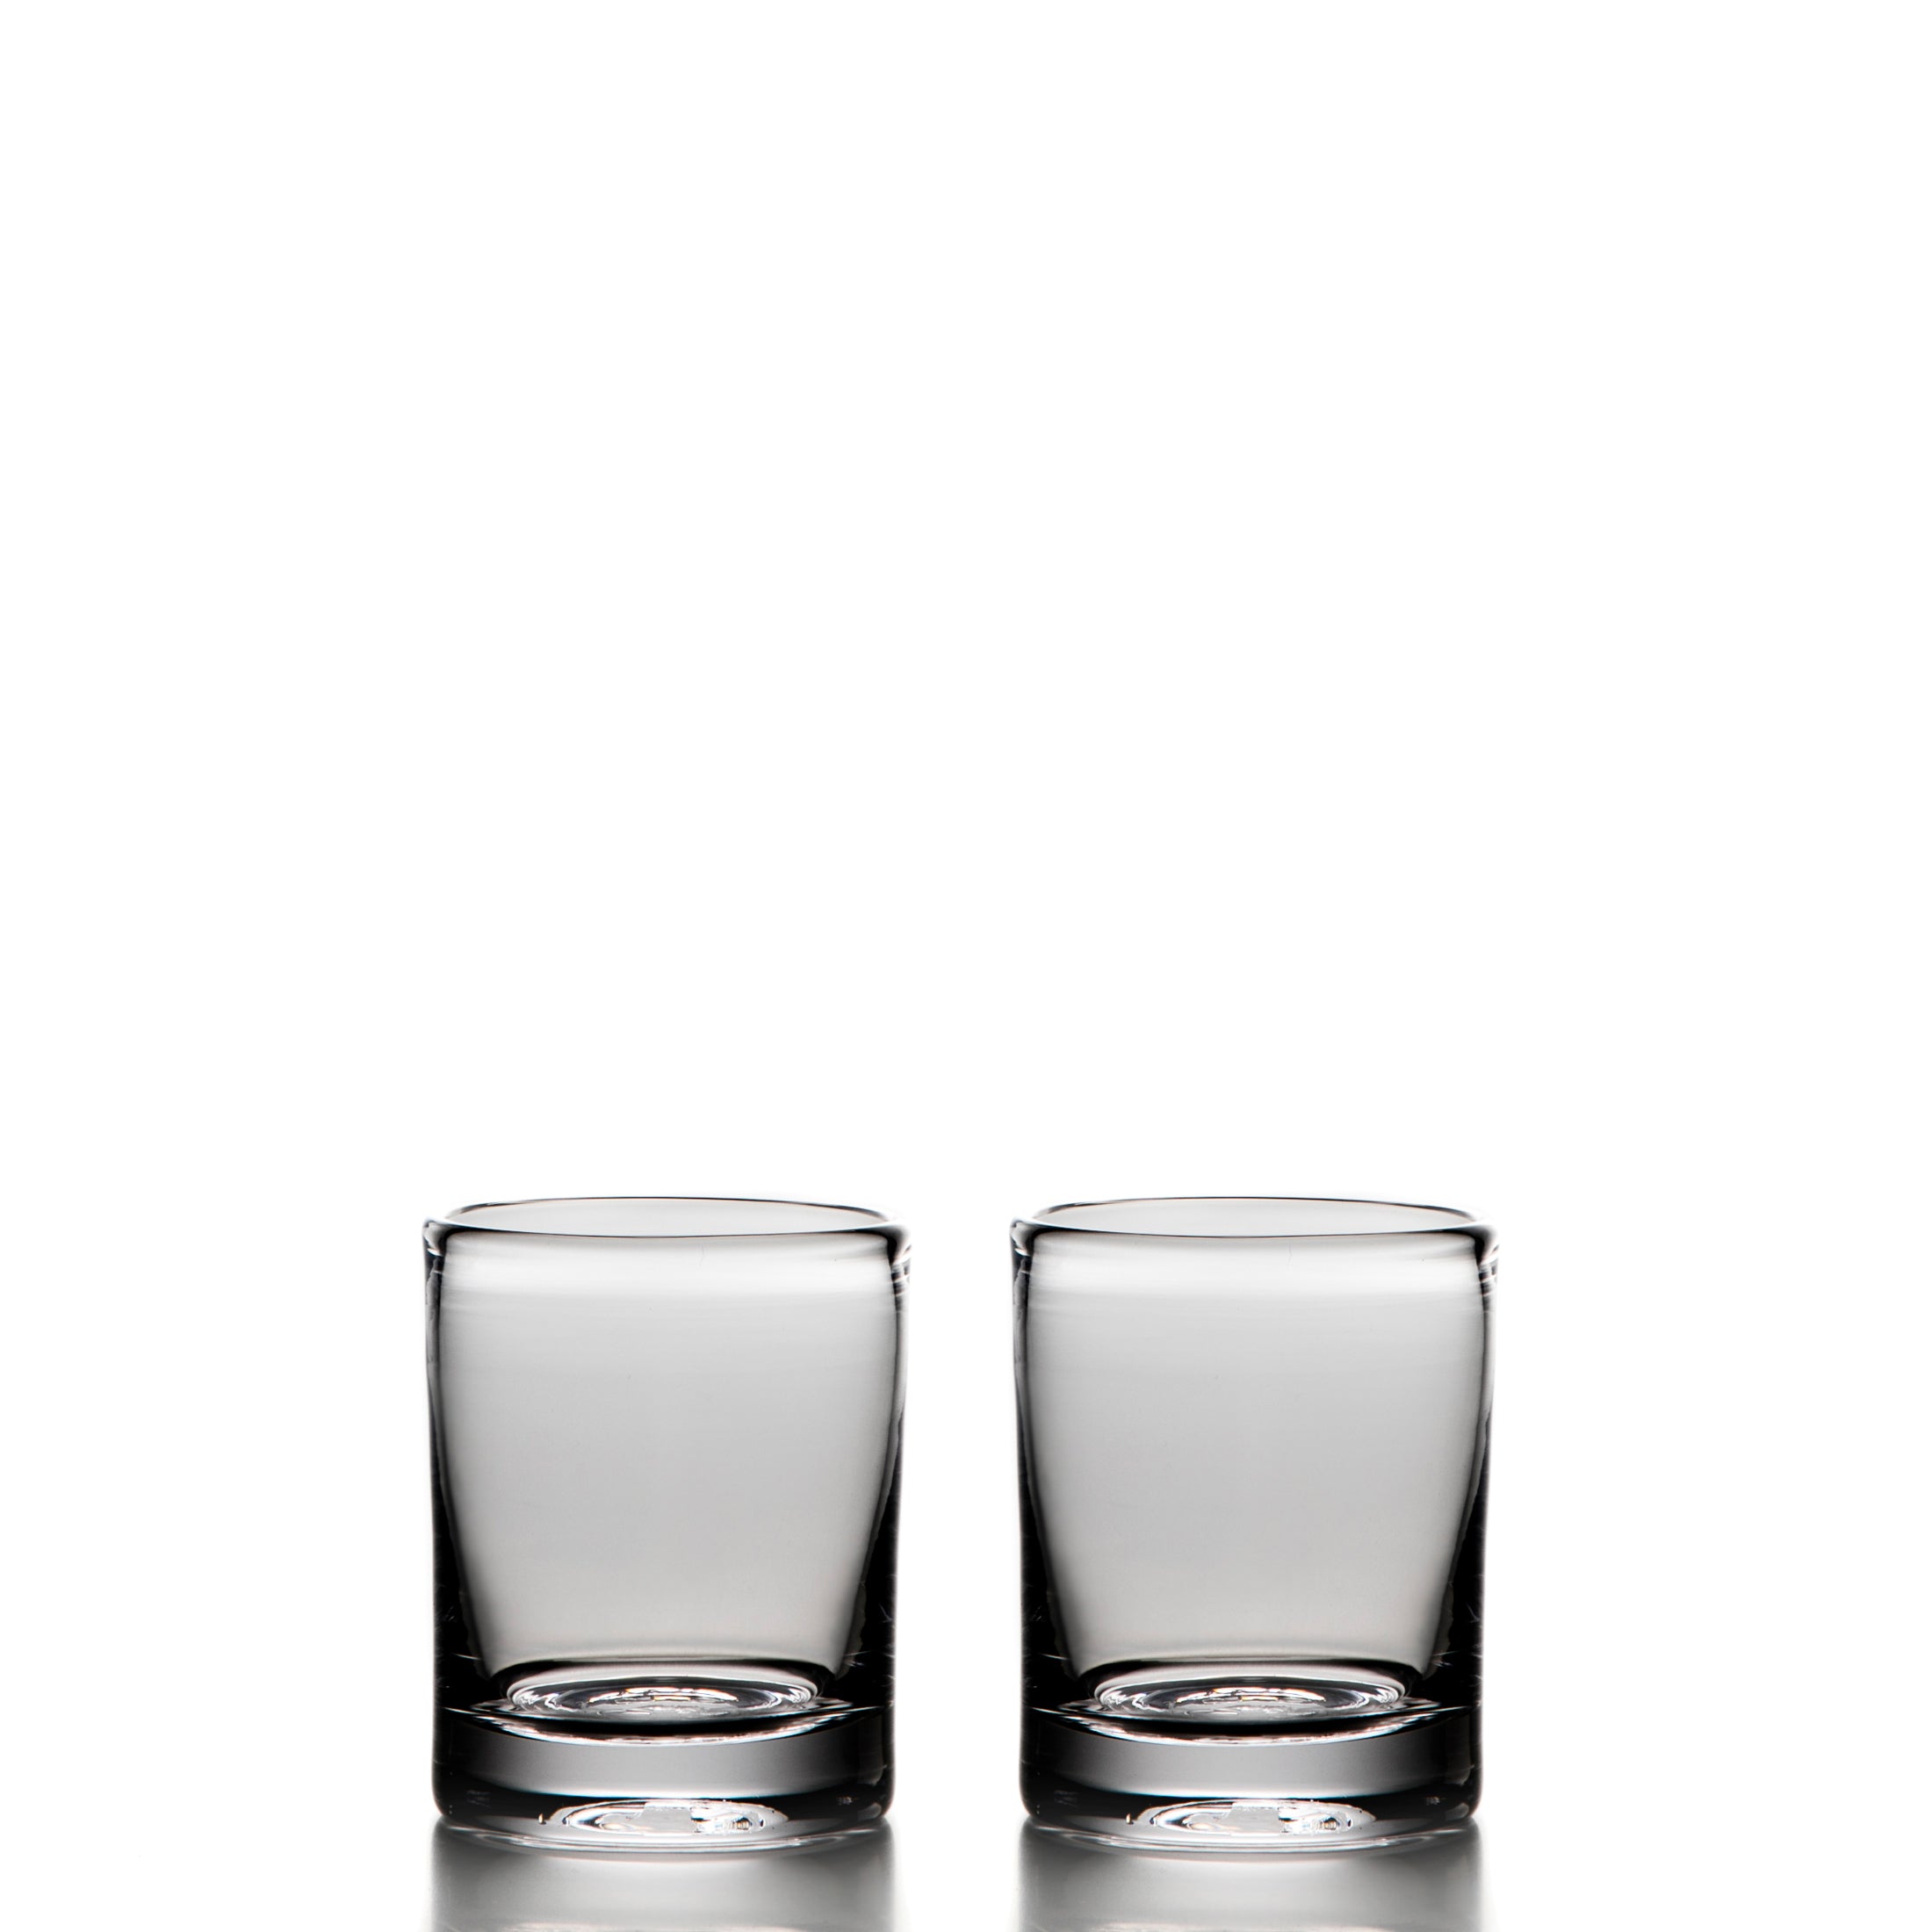 Ascutney Whiskey Glasses in a Gift Box - Set of 2